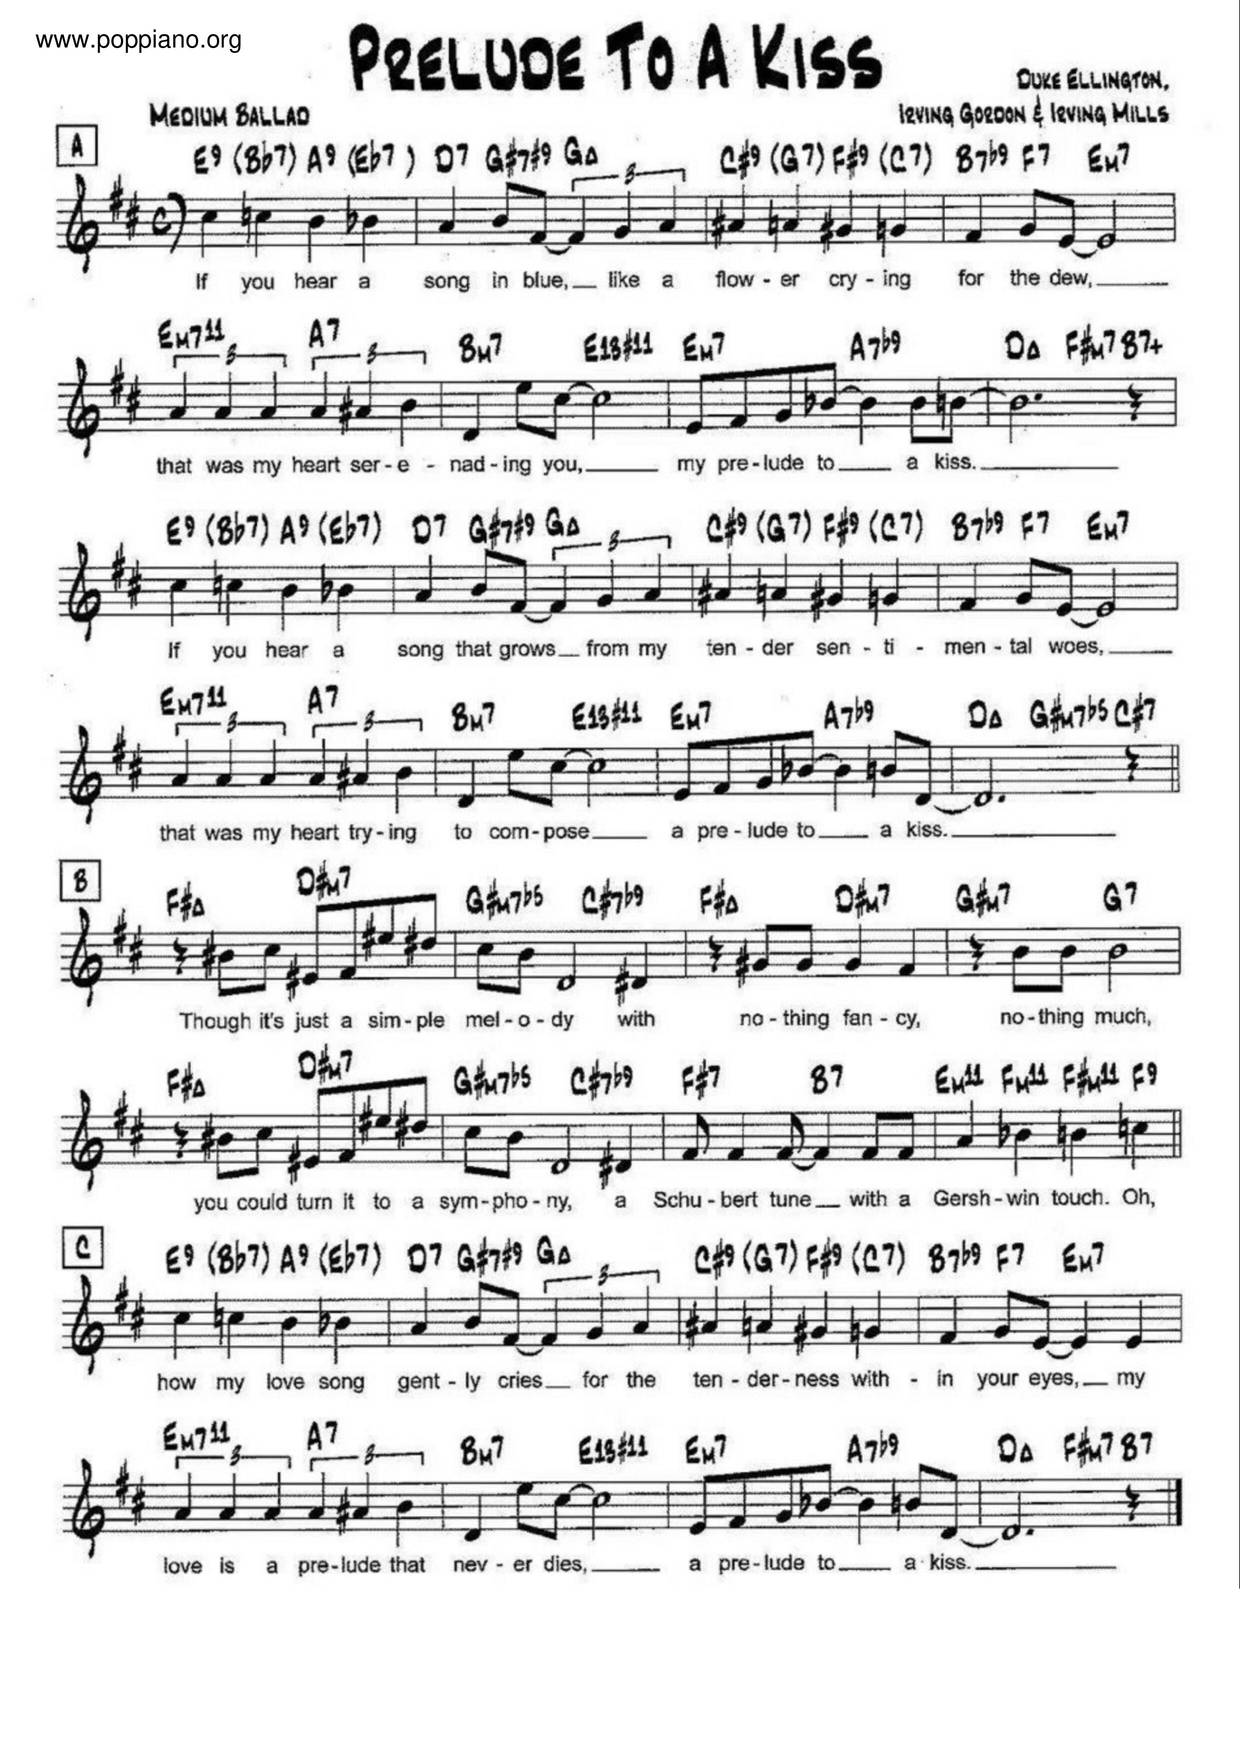 Prelude To A Kiss Score